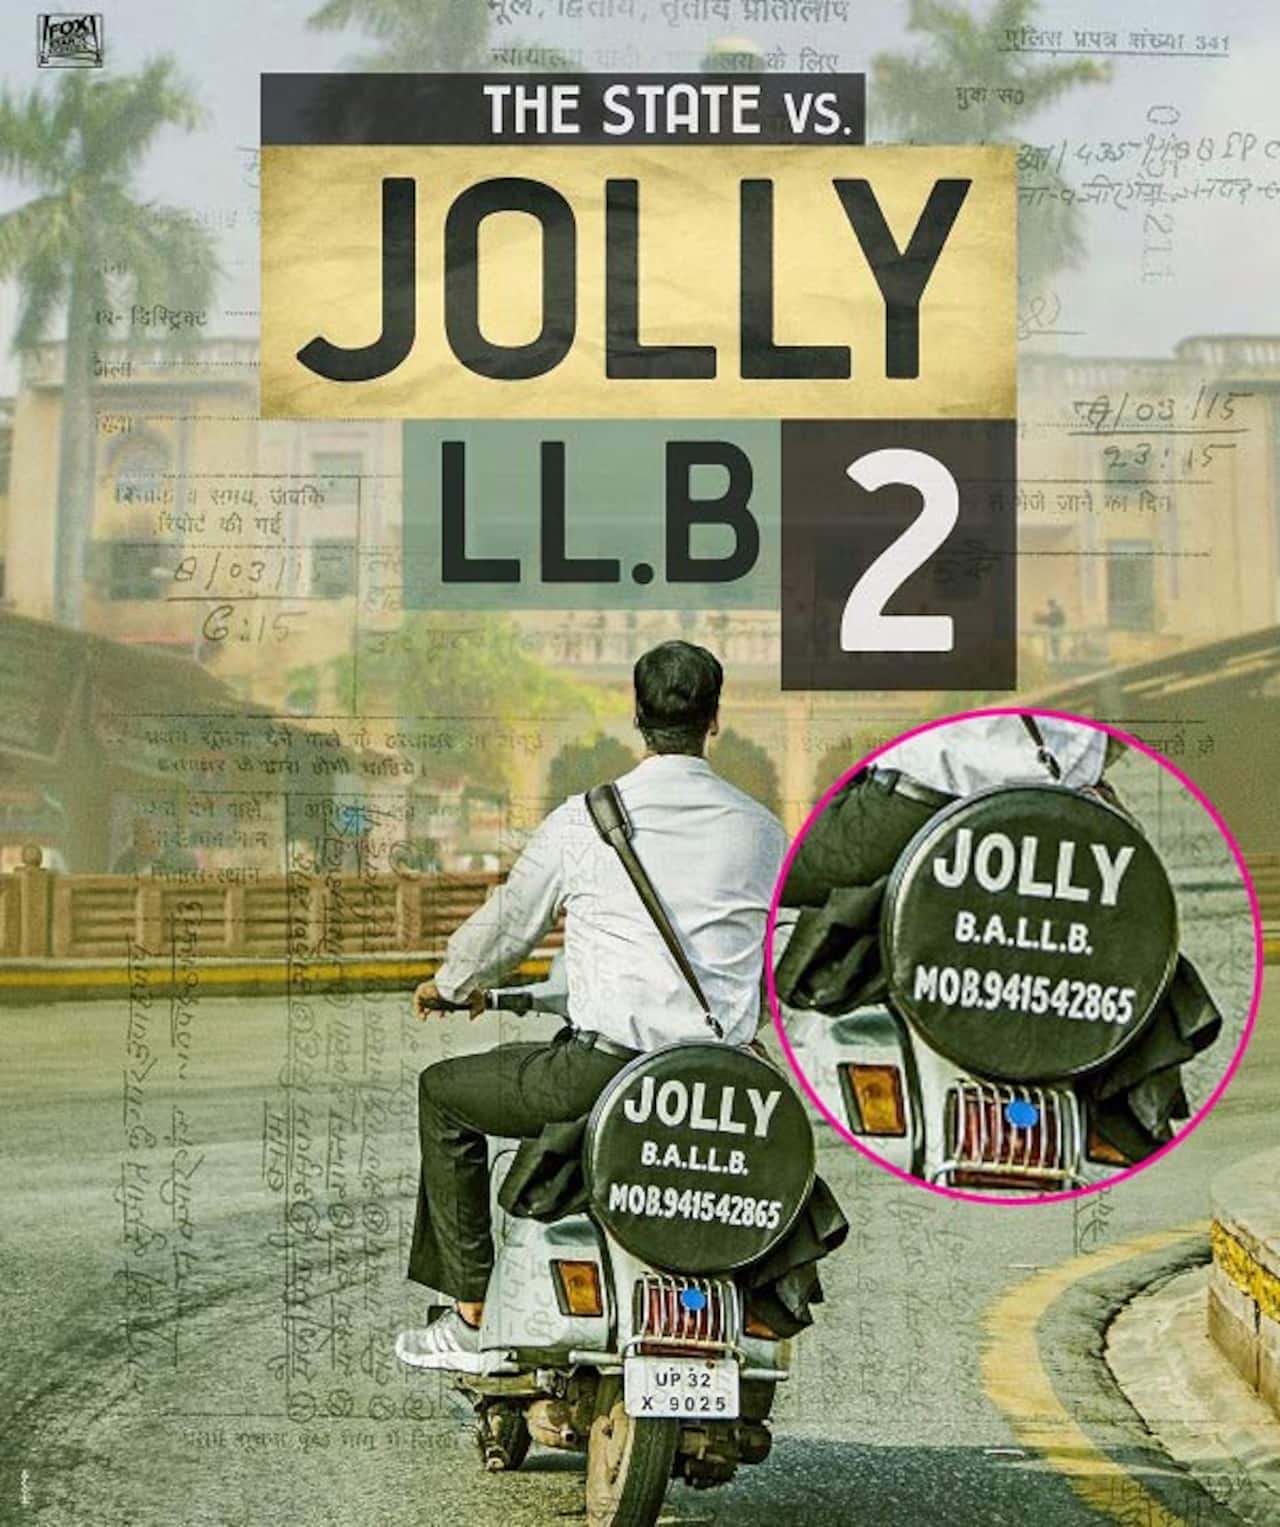 Akshay Kumar in Jolly LLB 2 will not get any clients, here's why